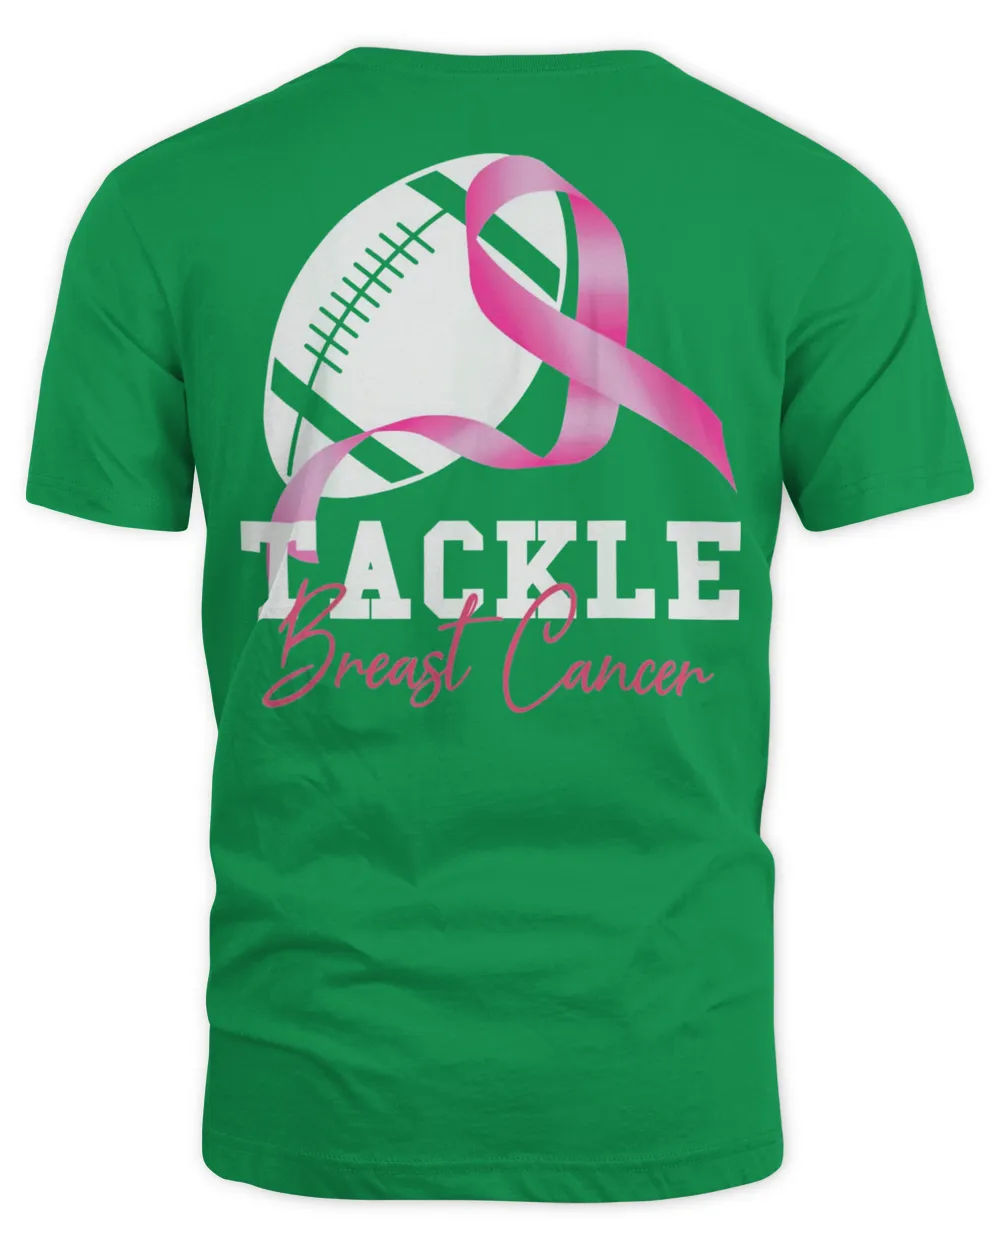 Tackle Breast Cancer Breast Cancer Awareness T-Shirt